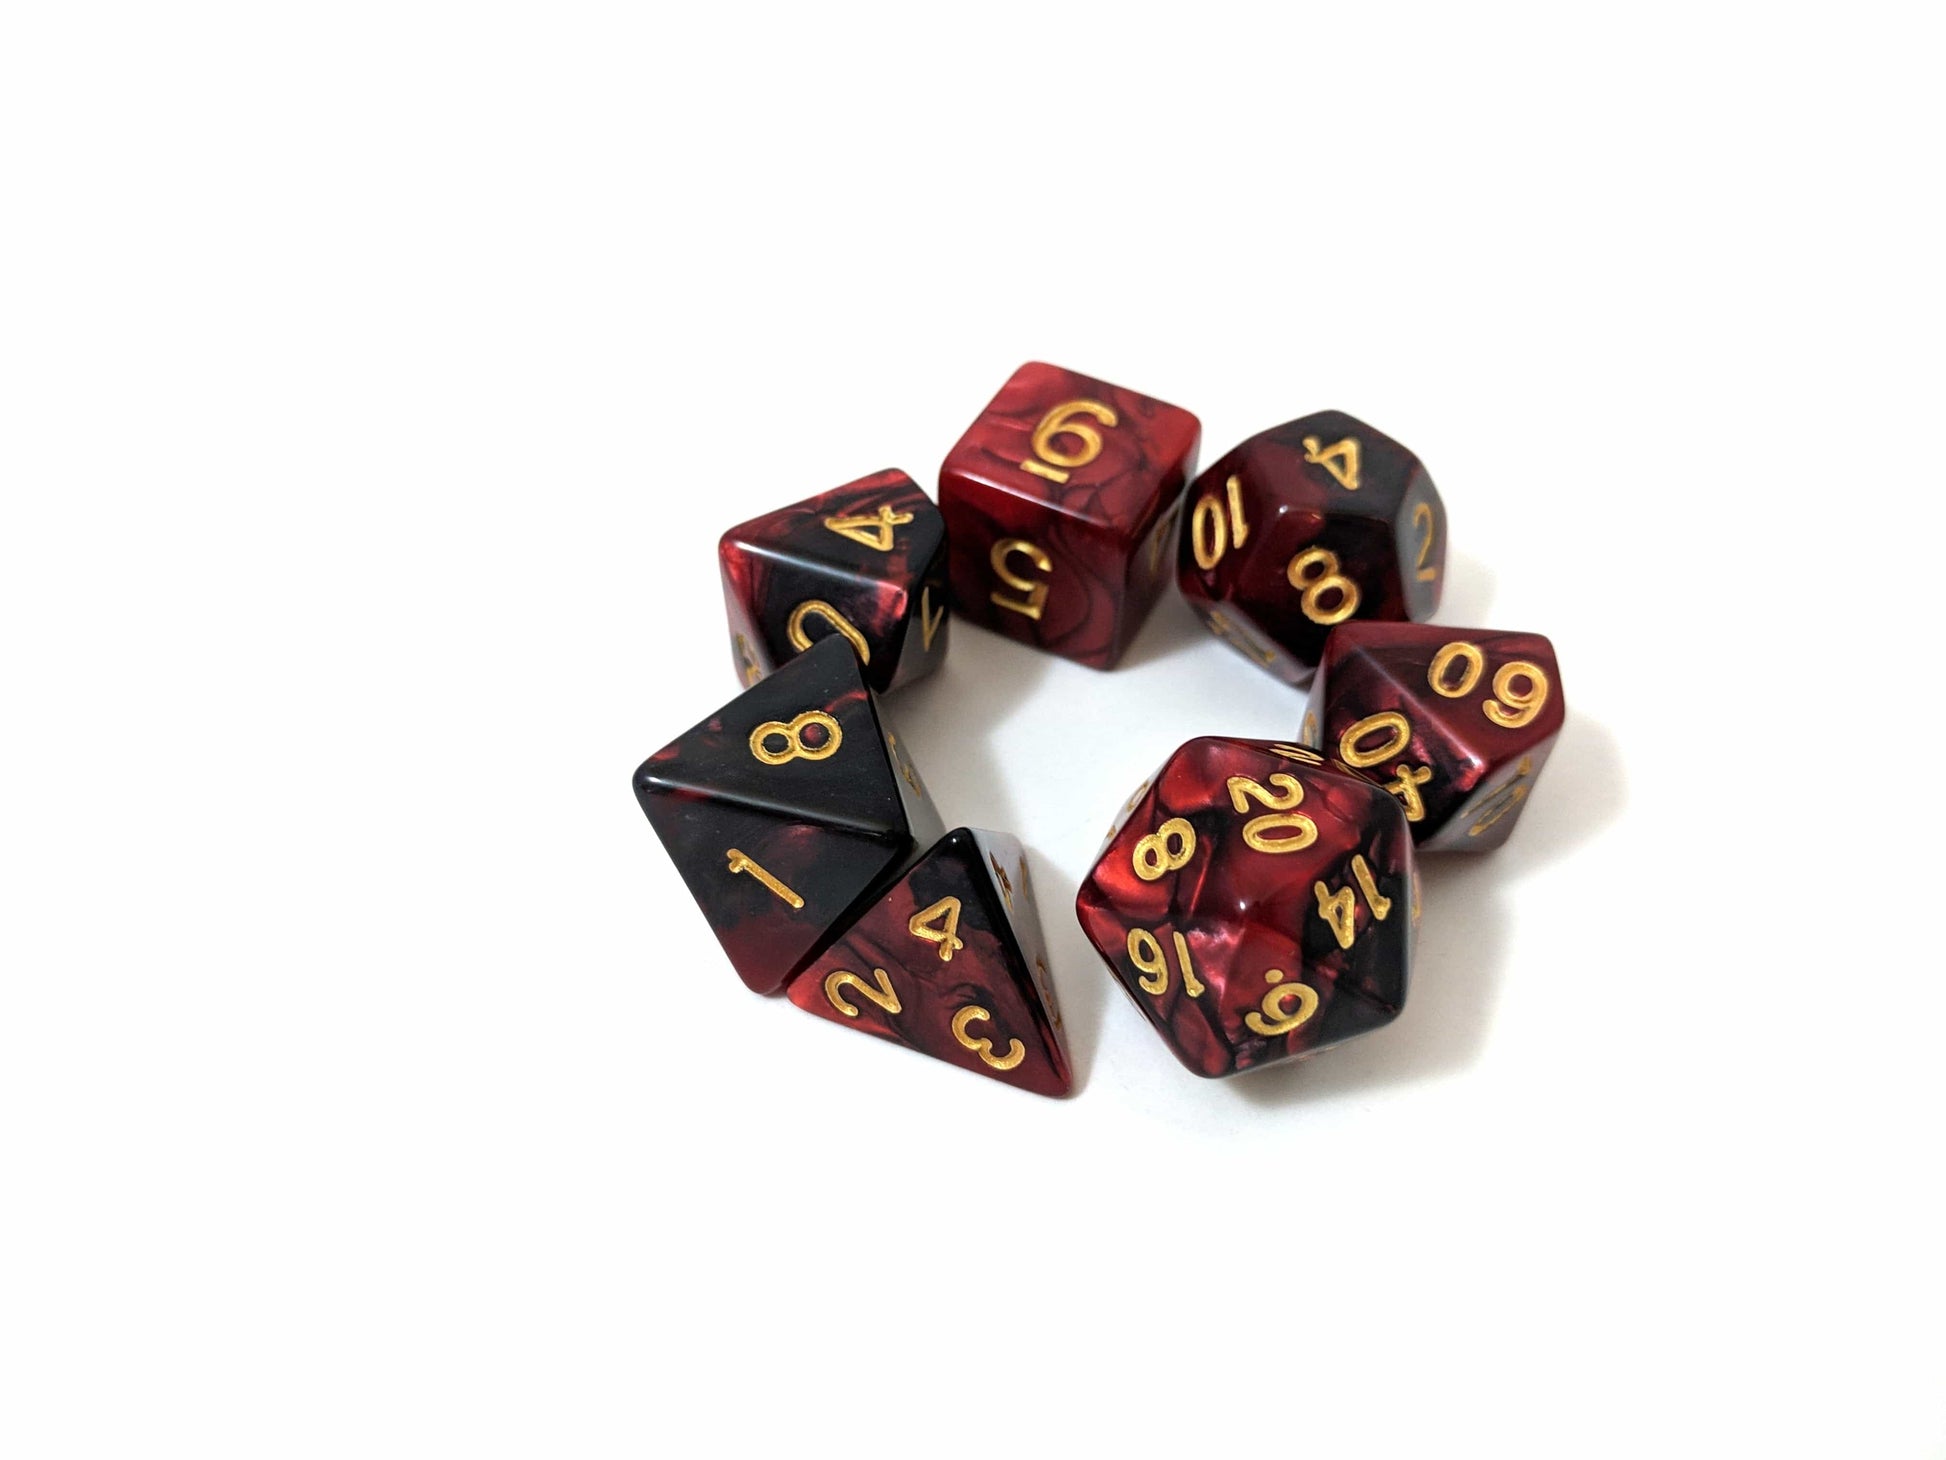 Blood Witch Dice Set, Red and Black Marbled 7 Piece D&D Dice Set - CozyGamer